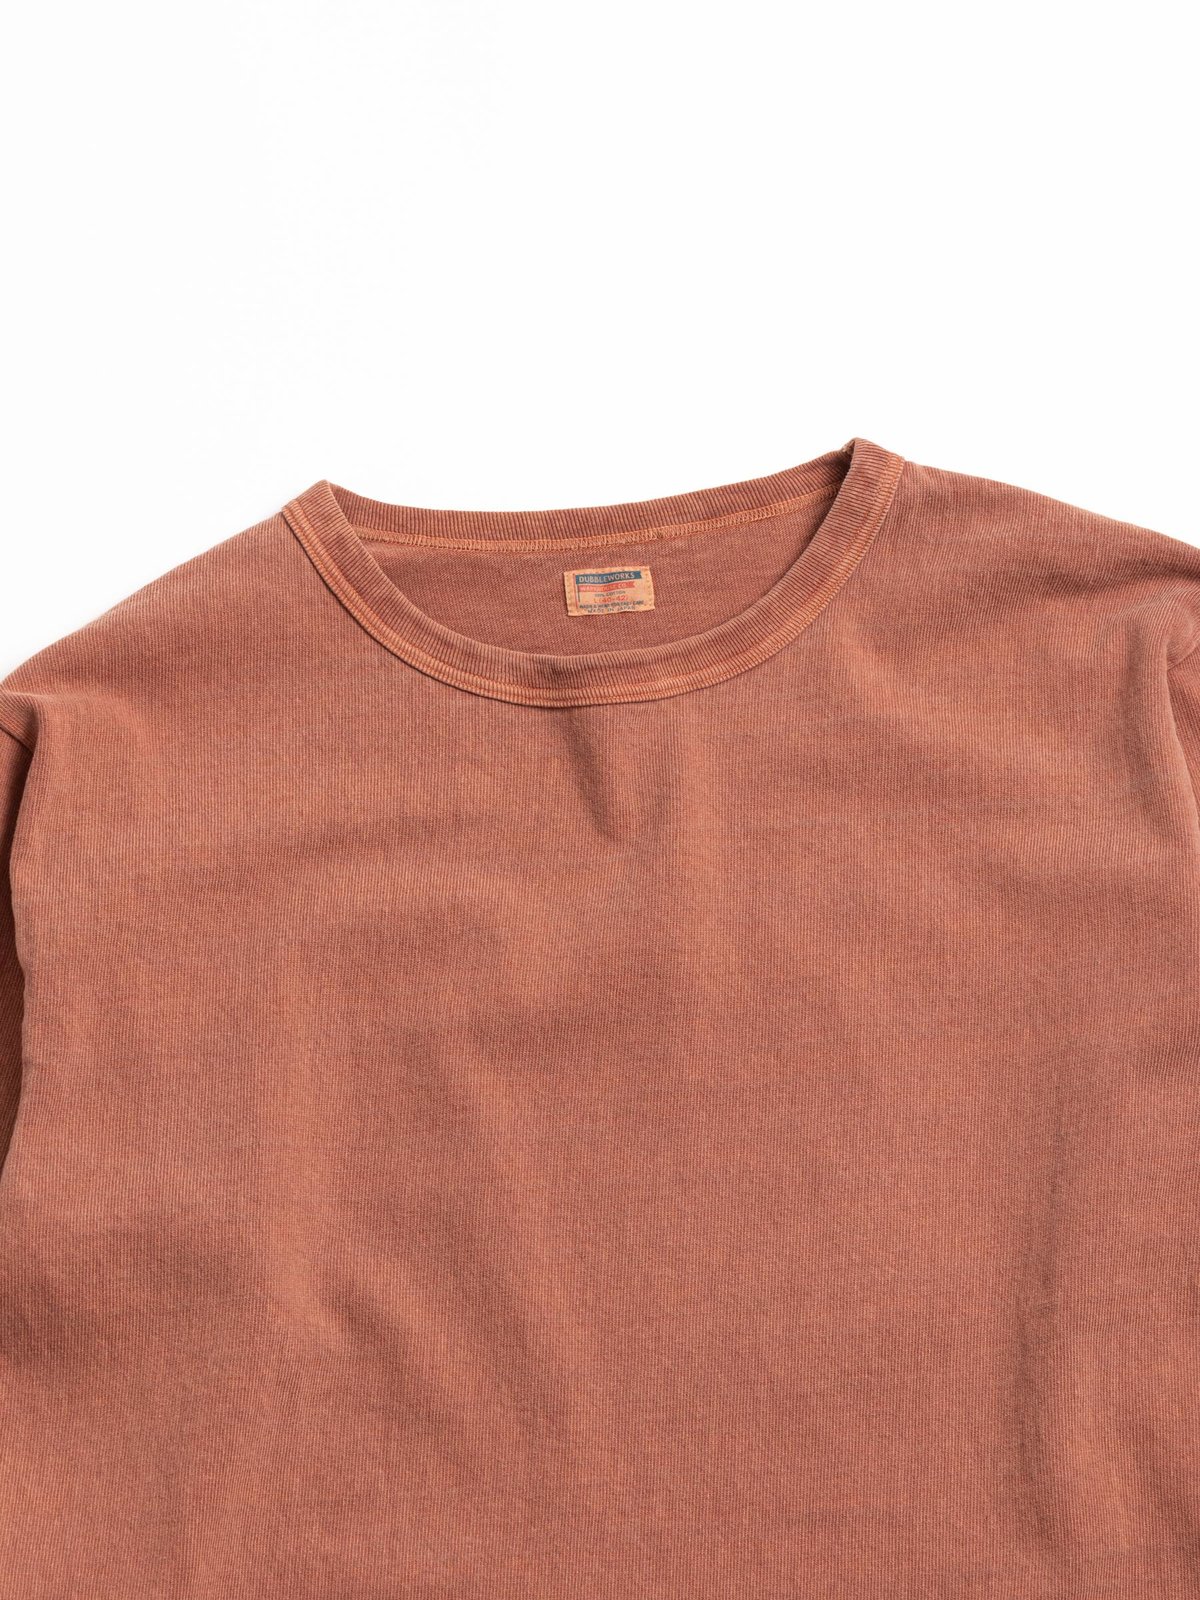 HEAVY WEIGHT PIGMENT DYED L/S TEE BRICK RED - Image 2